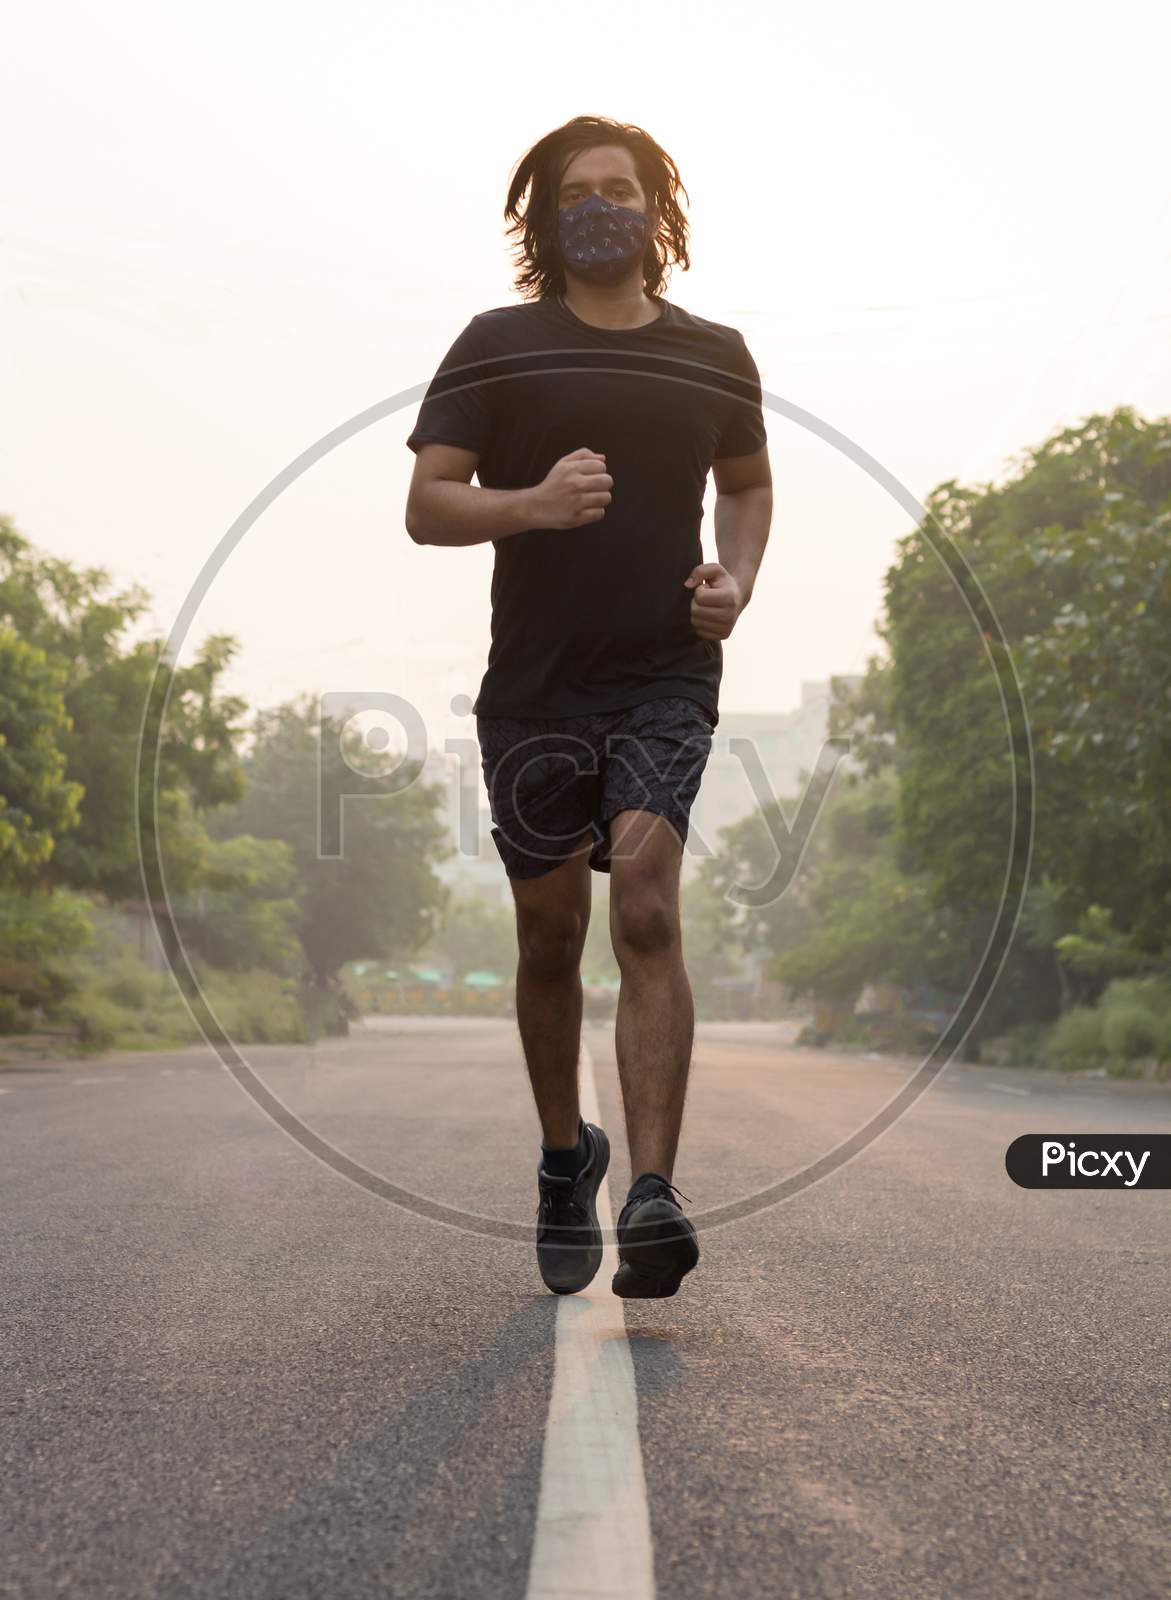 A Man Wearing Mask While Running In The Morning.